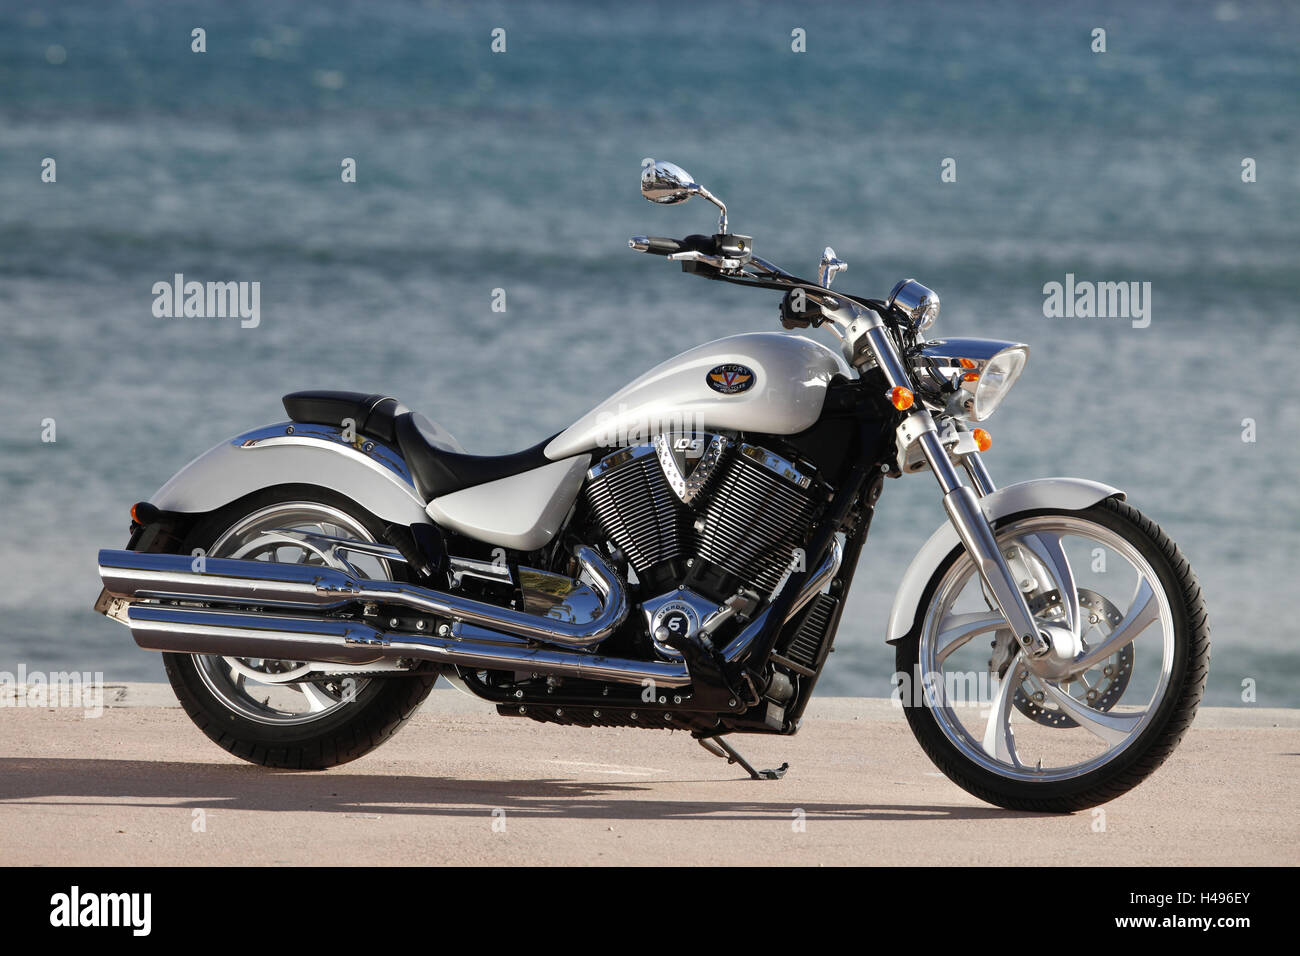 Motorcycle, Cruiser, Victory, white metallic, sea in the background, page standard on the right, Stock Photo